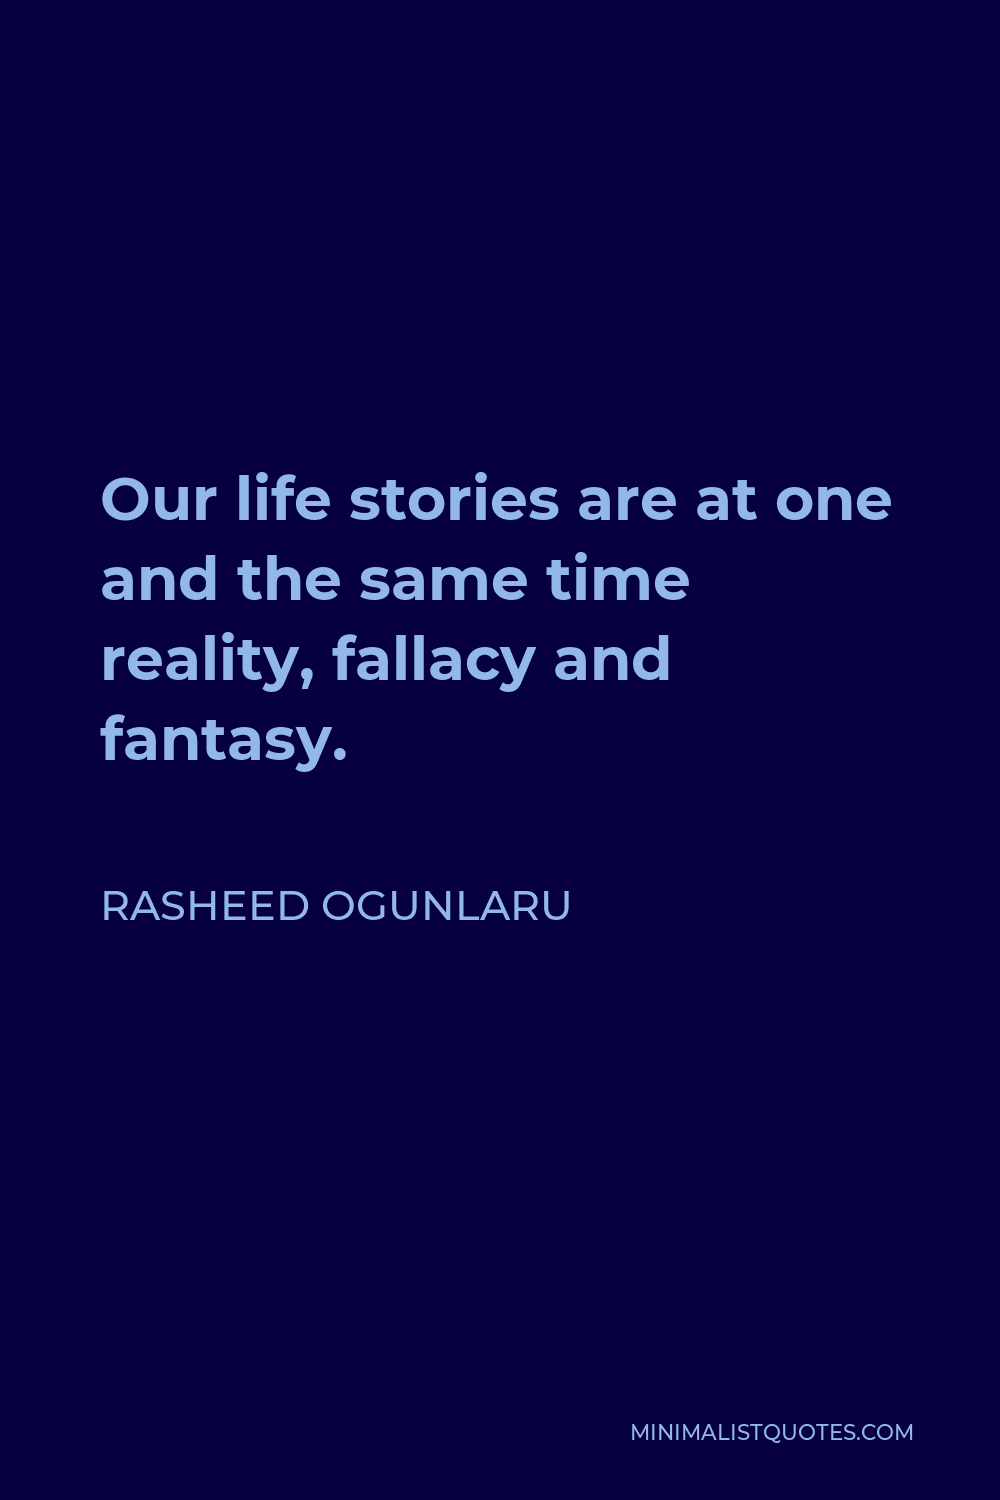 Rasheed Ogunlaru Quote - Our life stories are at one and the same time reality, fallacy and fantasy.